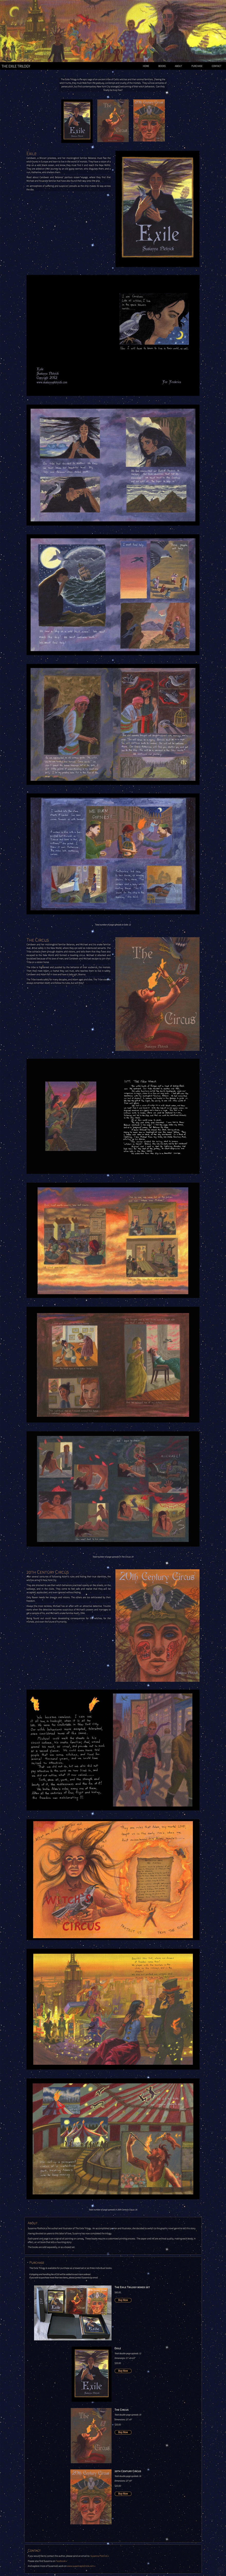 website design for authors - Web design for a trilogy of graphic novels, created originally as oil paintings on canvases. A long-scrolling one-page site with easy navigation.																																											 - long-scrolling page with rich visual sections making the website delightful to use.